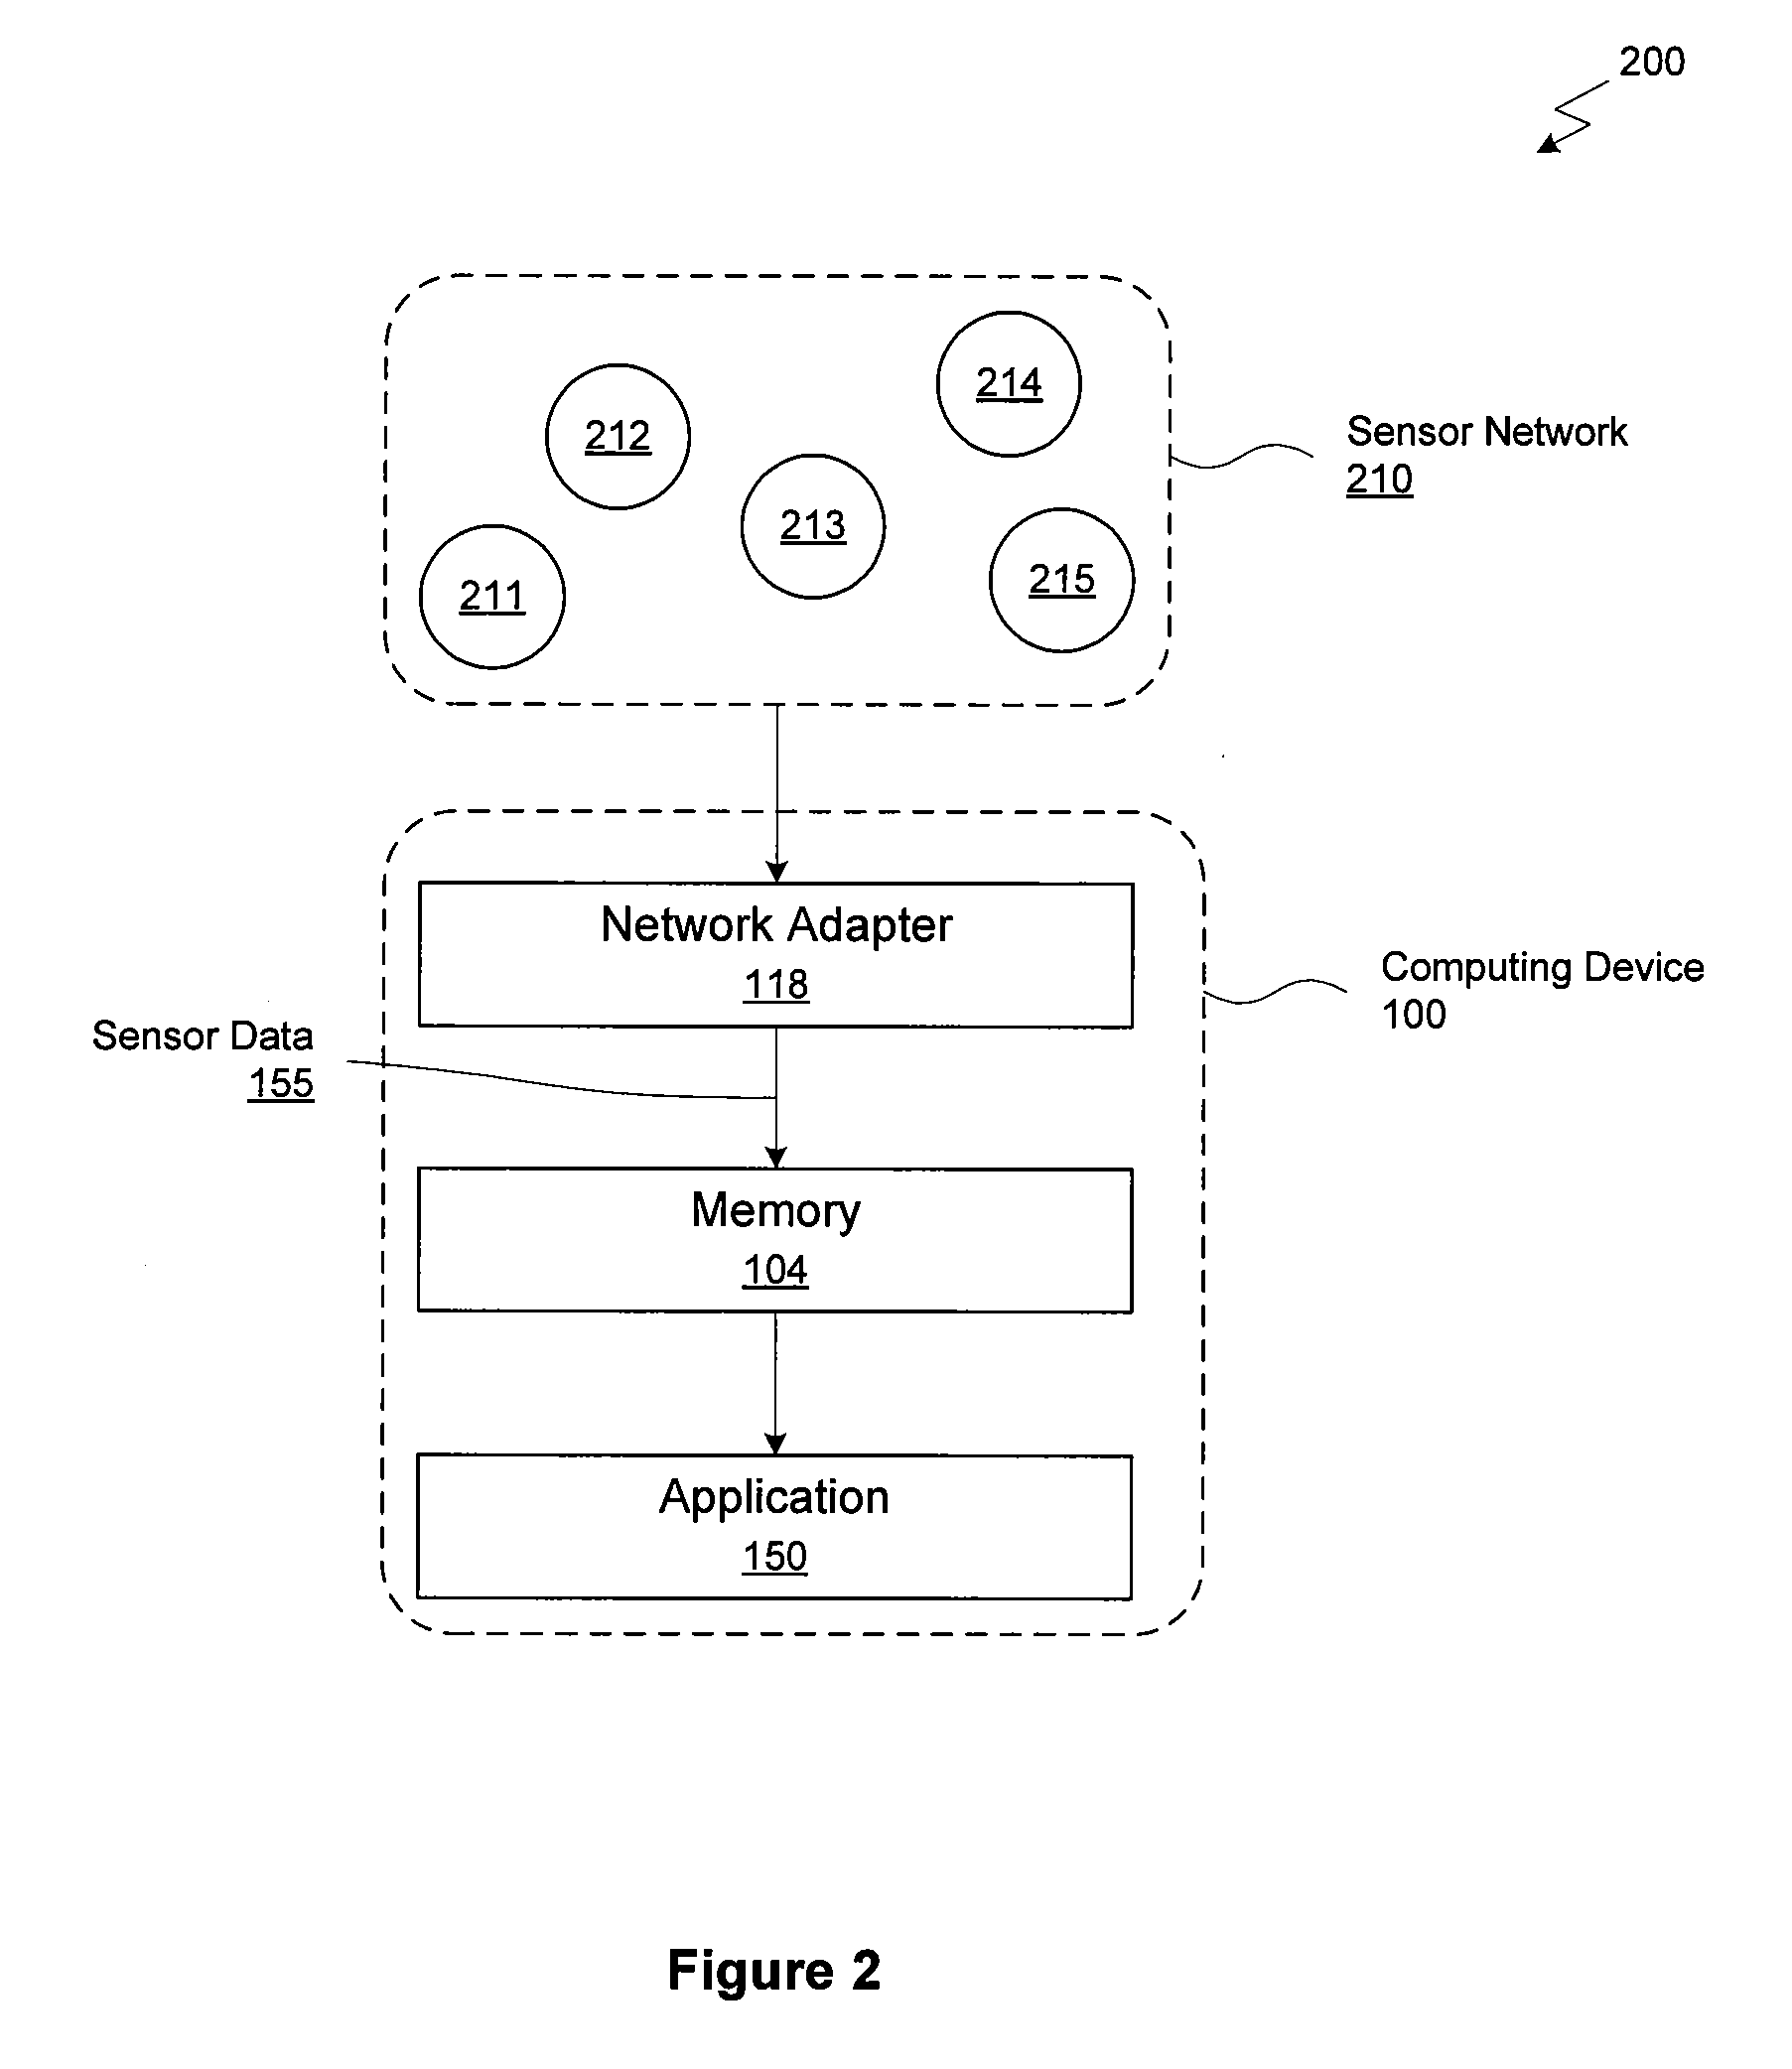 Systems and methods for augmenting panoramic image data with performance related data for a building